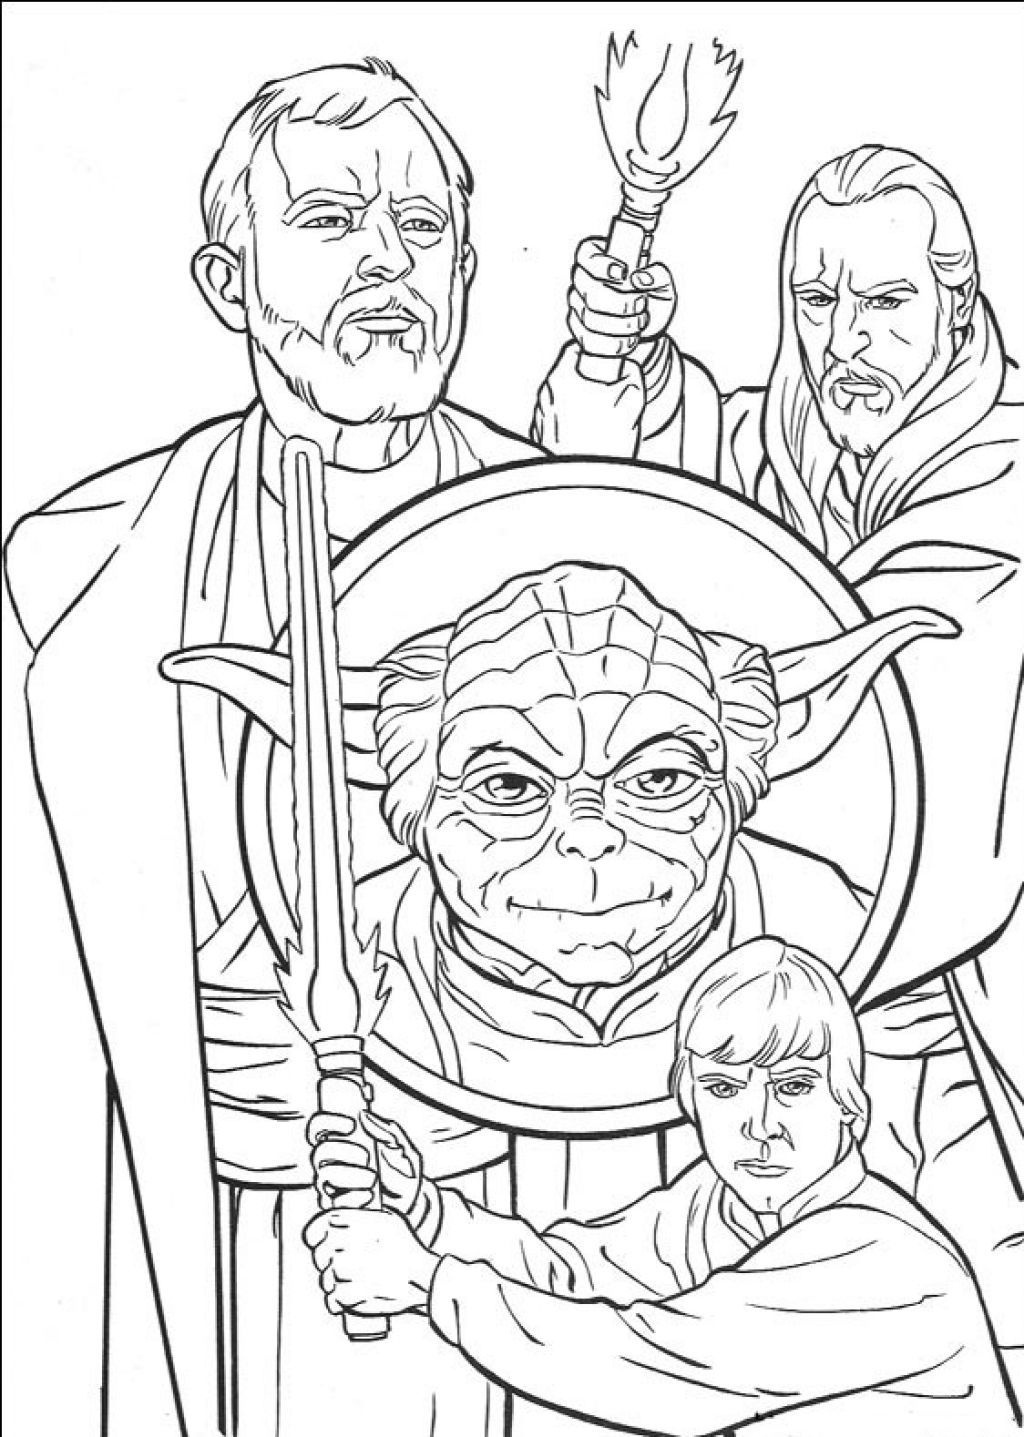 Star Wars Coloring Pages - Free Printable Star Wars Coloring Pages - Free Printable Star Wars Coloring Pages